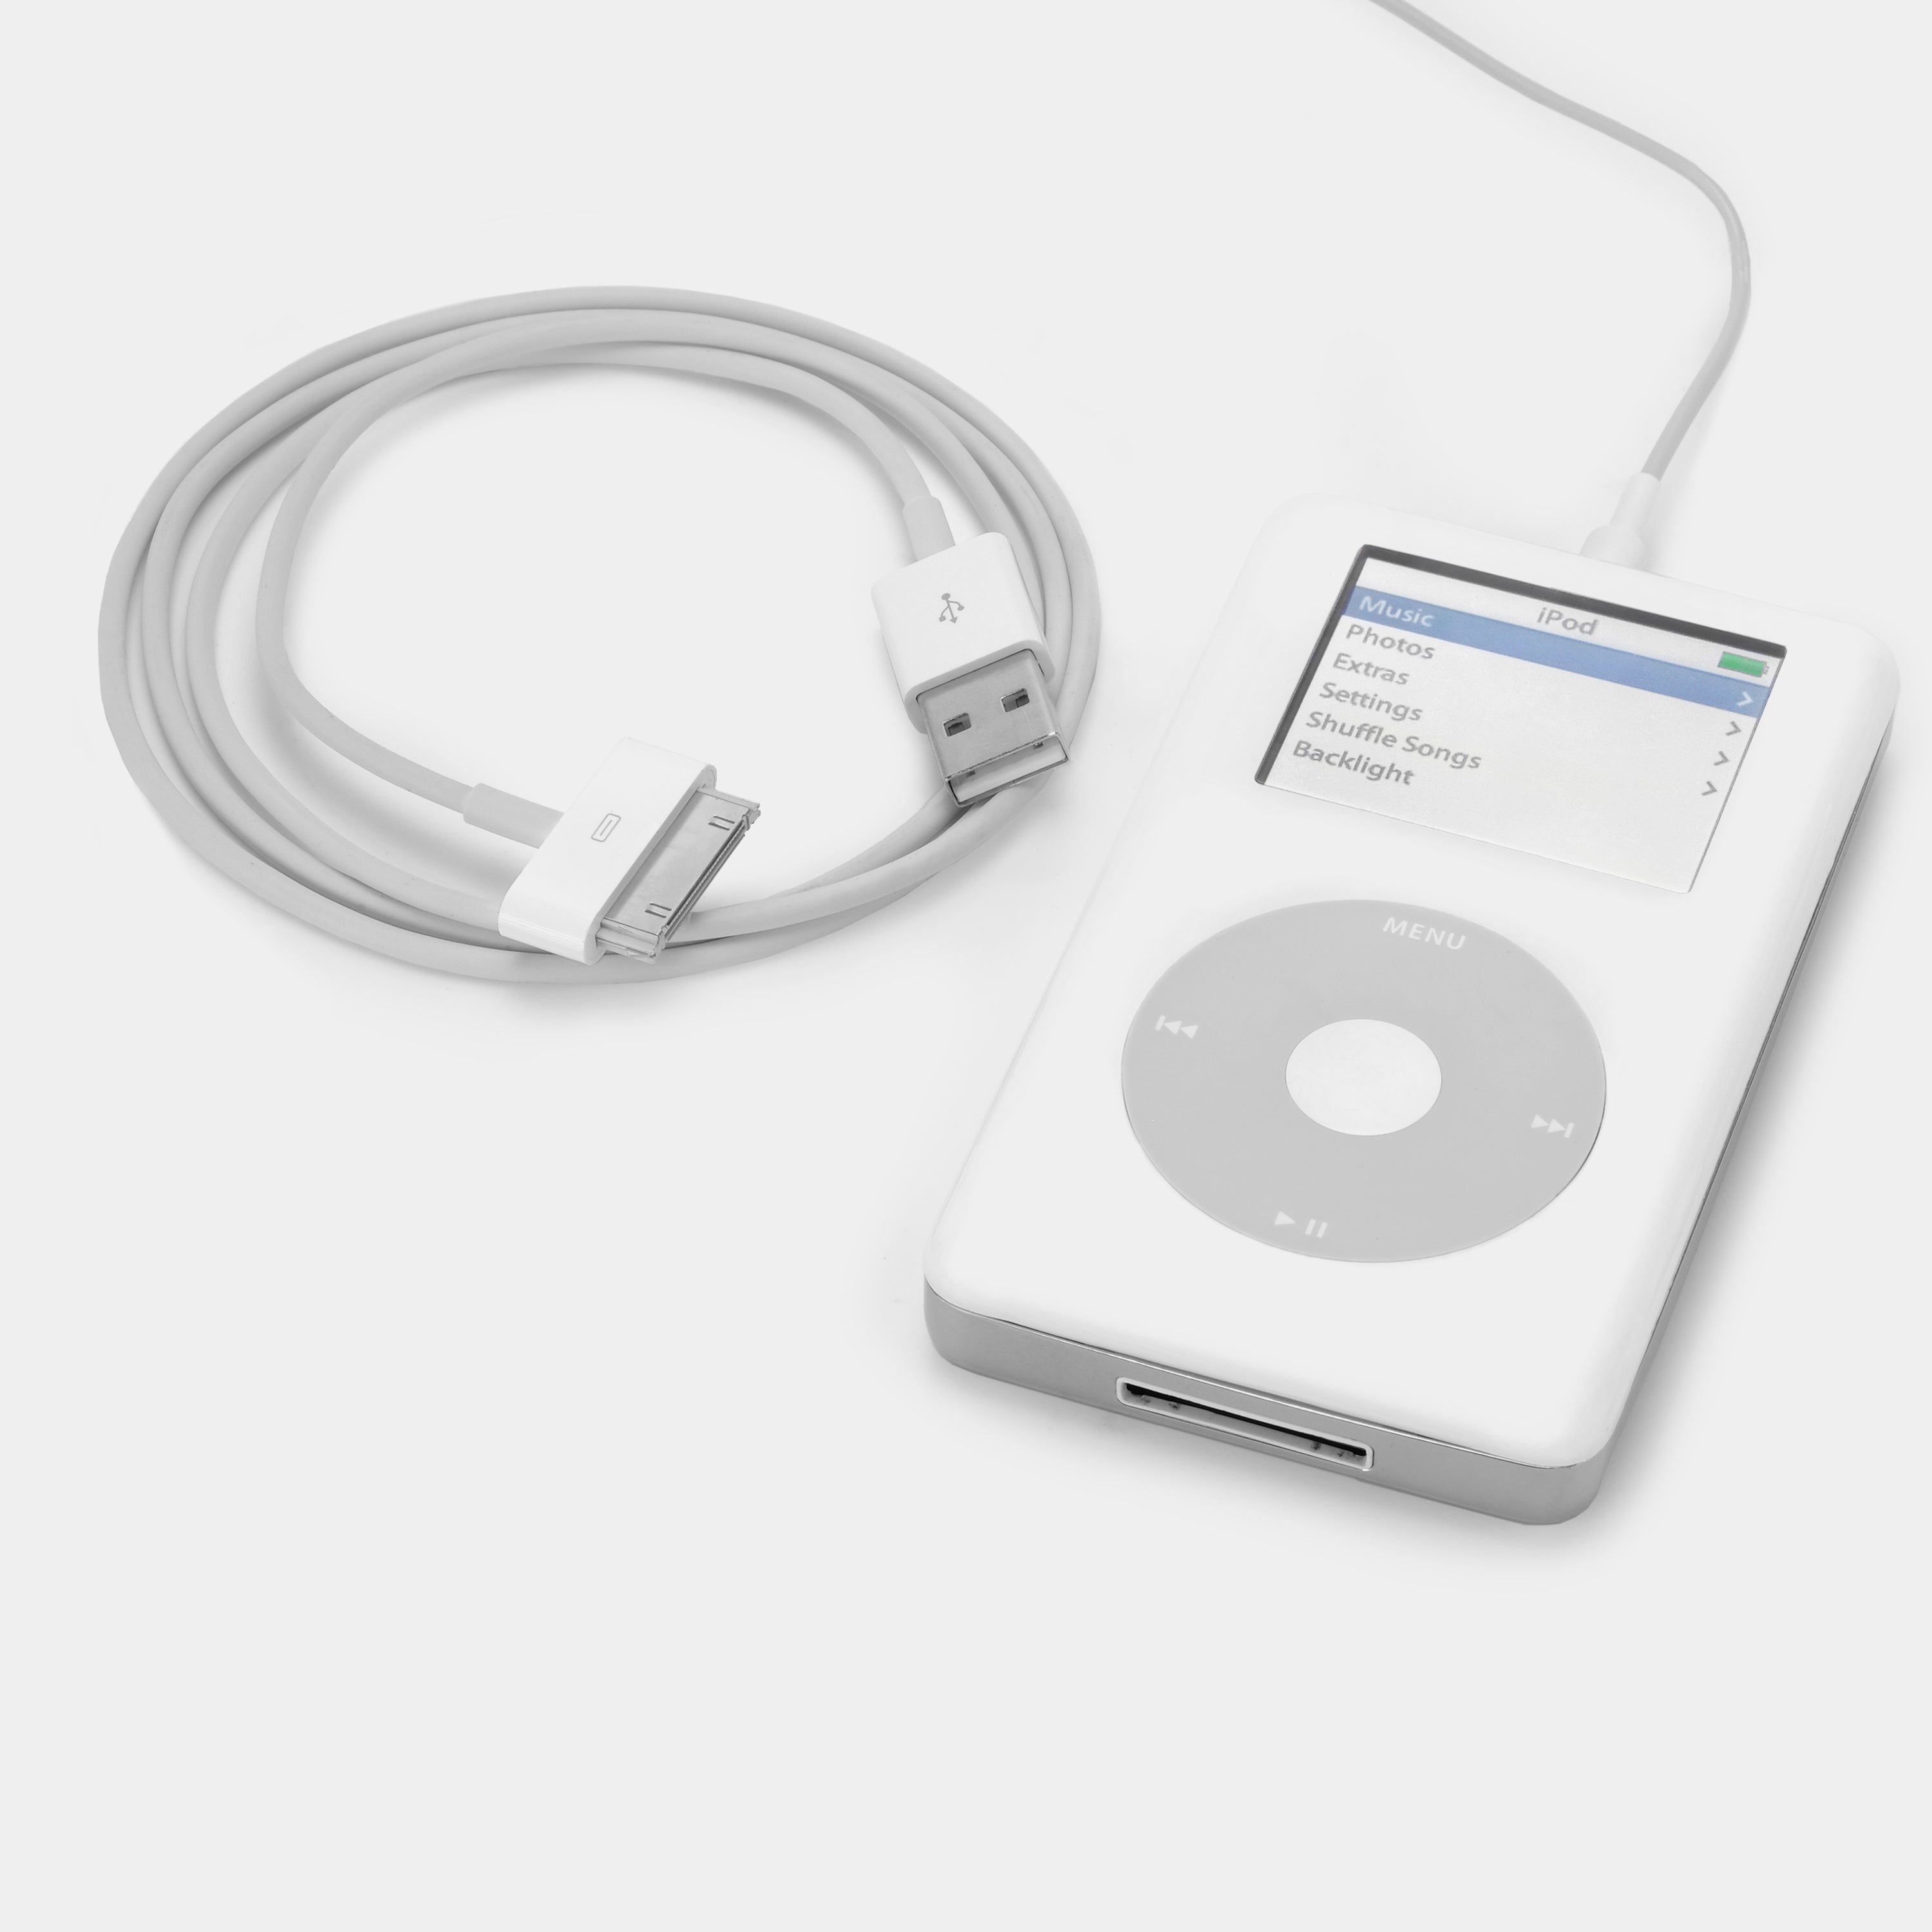 Apple iPod Color (4th Generation) MP3 Player